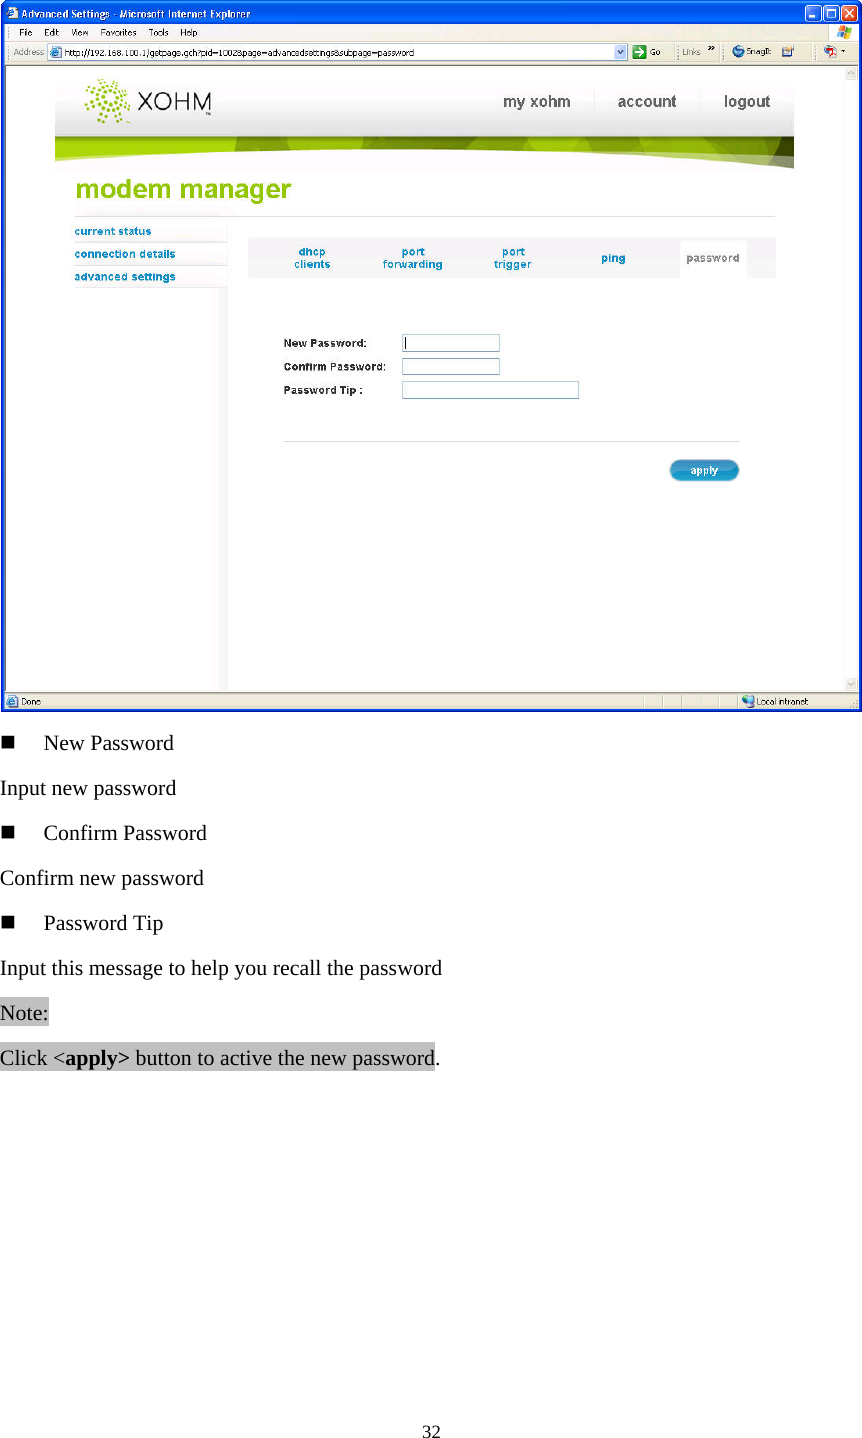 32     New Password Input new password   Confirm Password Confirm new password   Password Tip Input this message to help you recall the password Note: Click &lt;apply&gt; button to active the new password. 